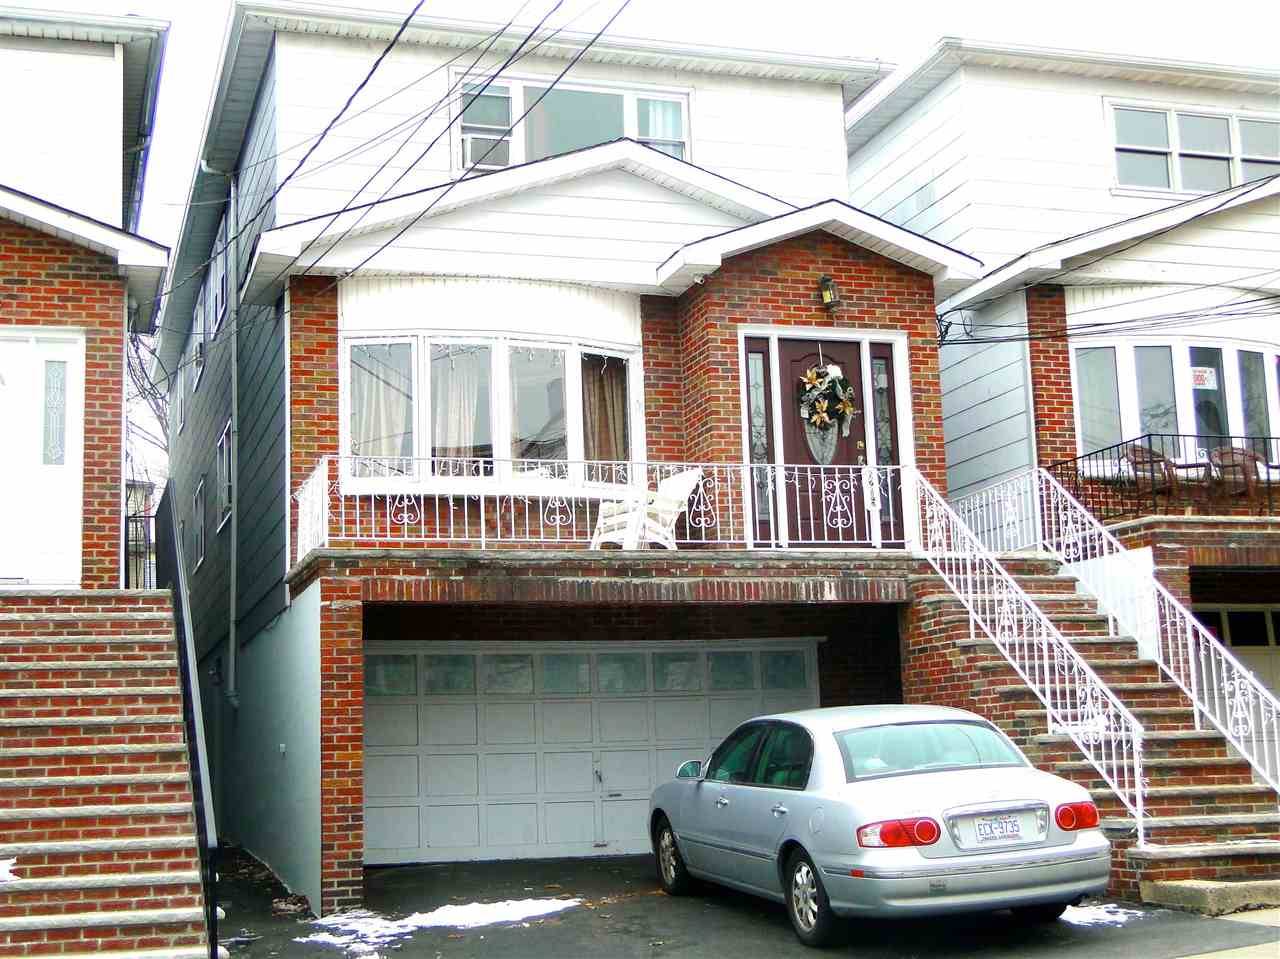 This beautiful well maintained 3 family home is located at 6215 Polk Street in West New York